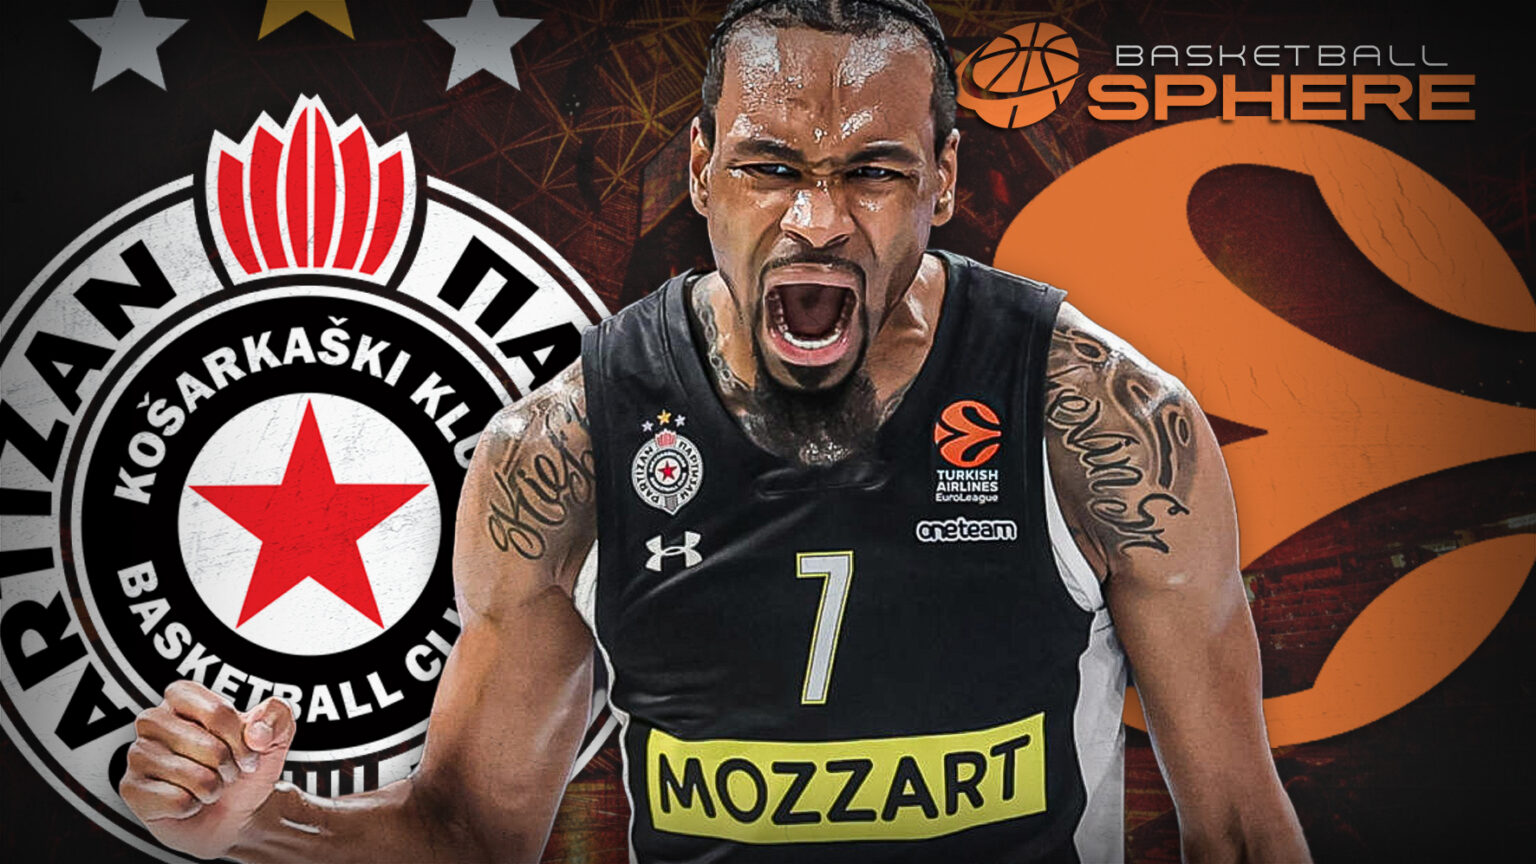 EuroLeague Power Rankings Basketball Sphere presents and ranks all